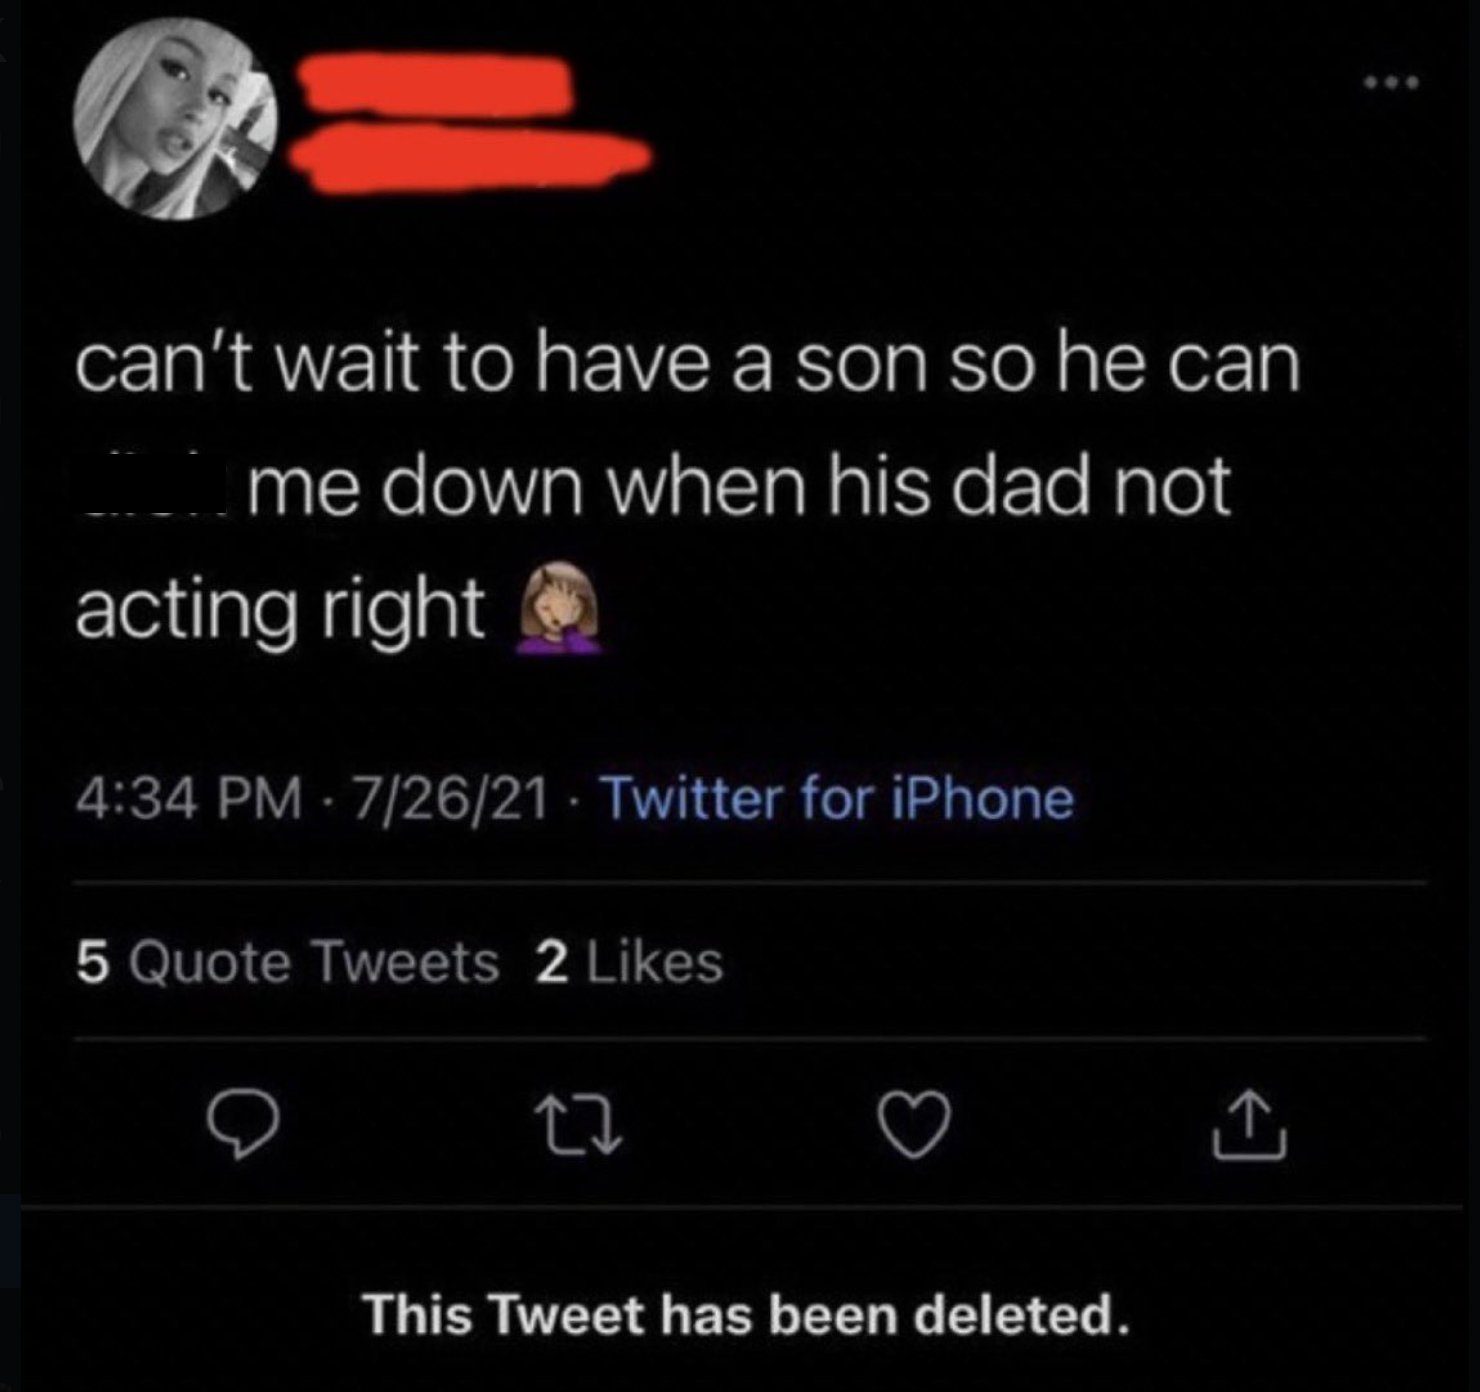 screenshot - 1019 can't wait to have a son so he can me down when his dad not acting right 72621 Twitter for iPhone 5 Quote Tweets 2 This Tweet has been deleted.